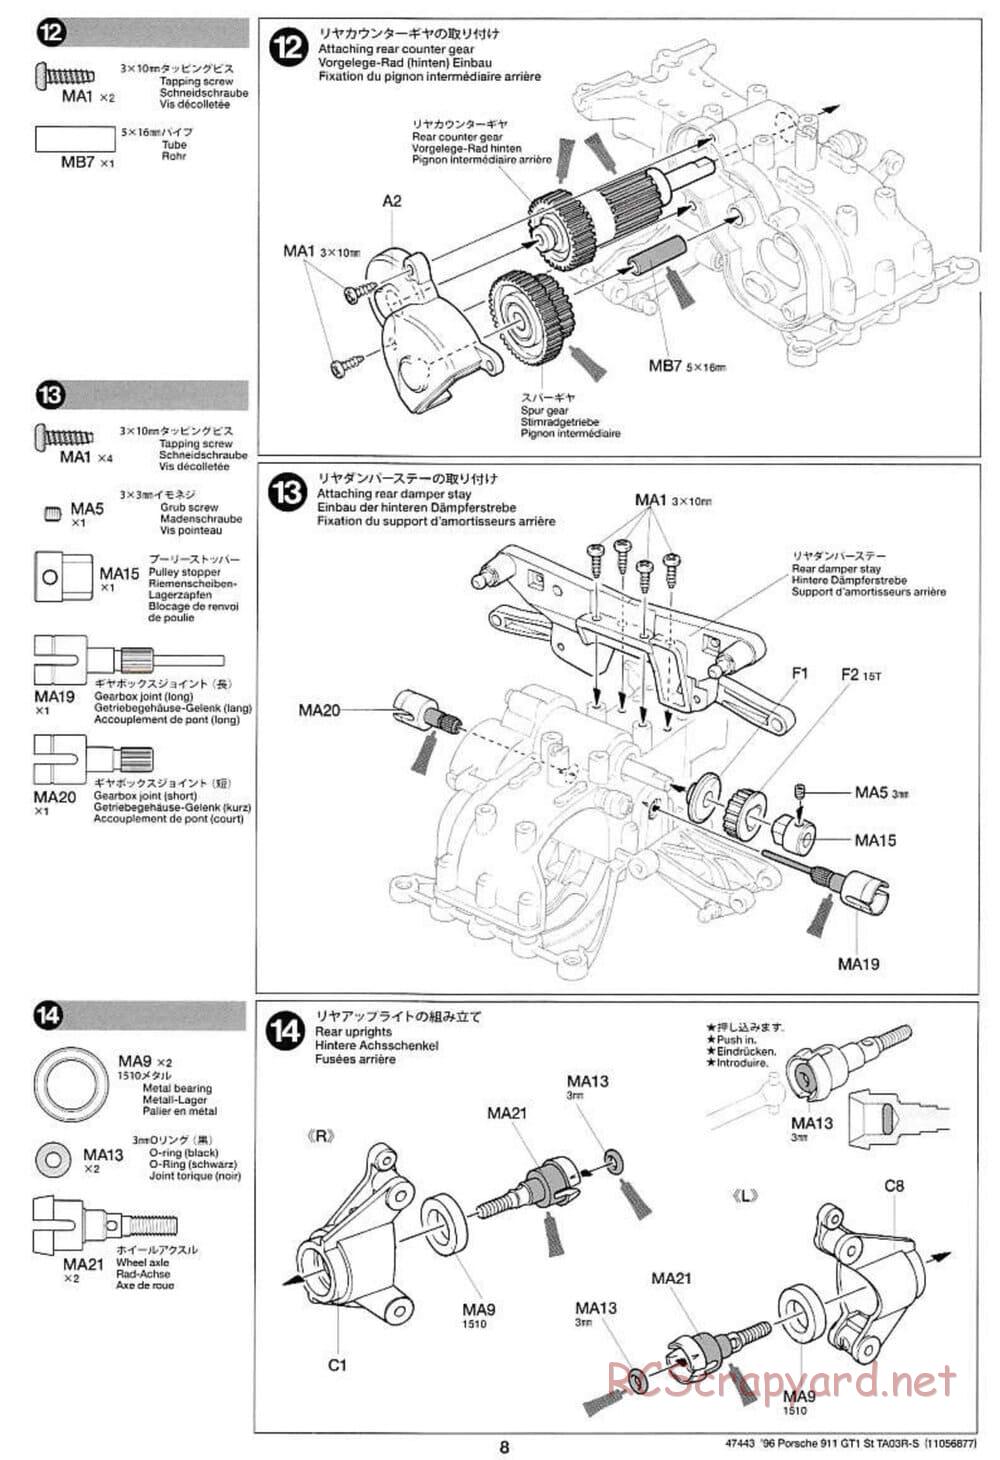 Tamiya - Porsche 911 GT1 Street - TA-03RS Chassis - Manual - Page 8